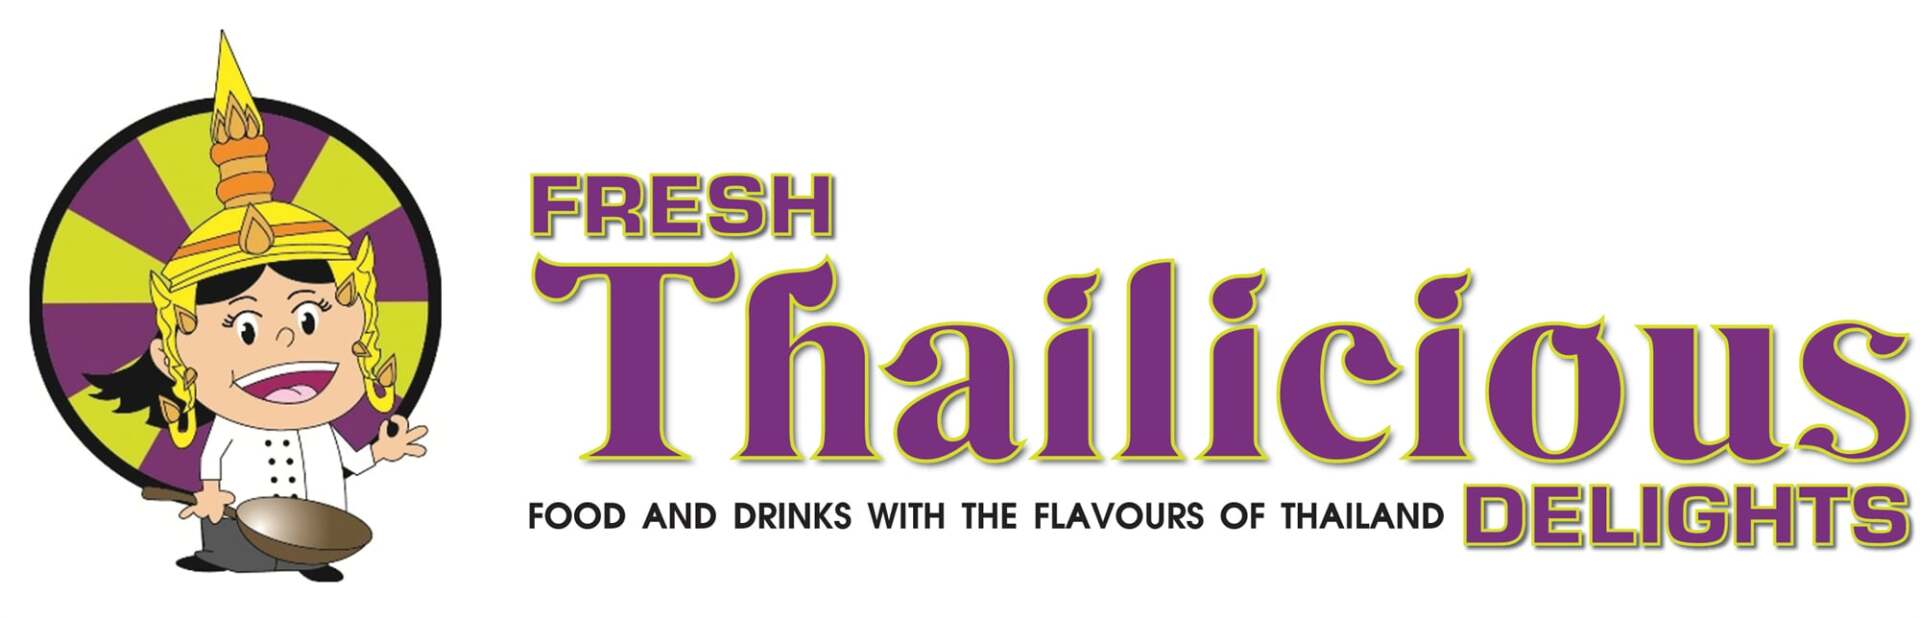 Thai Food And Catering Service In Central Queensland